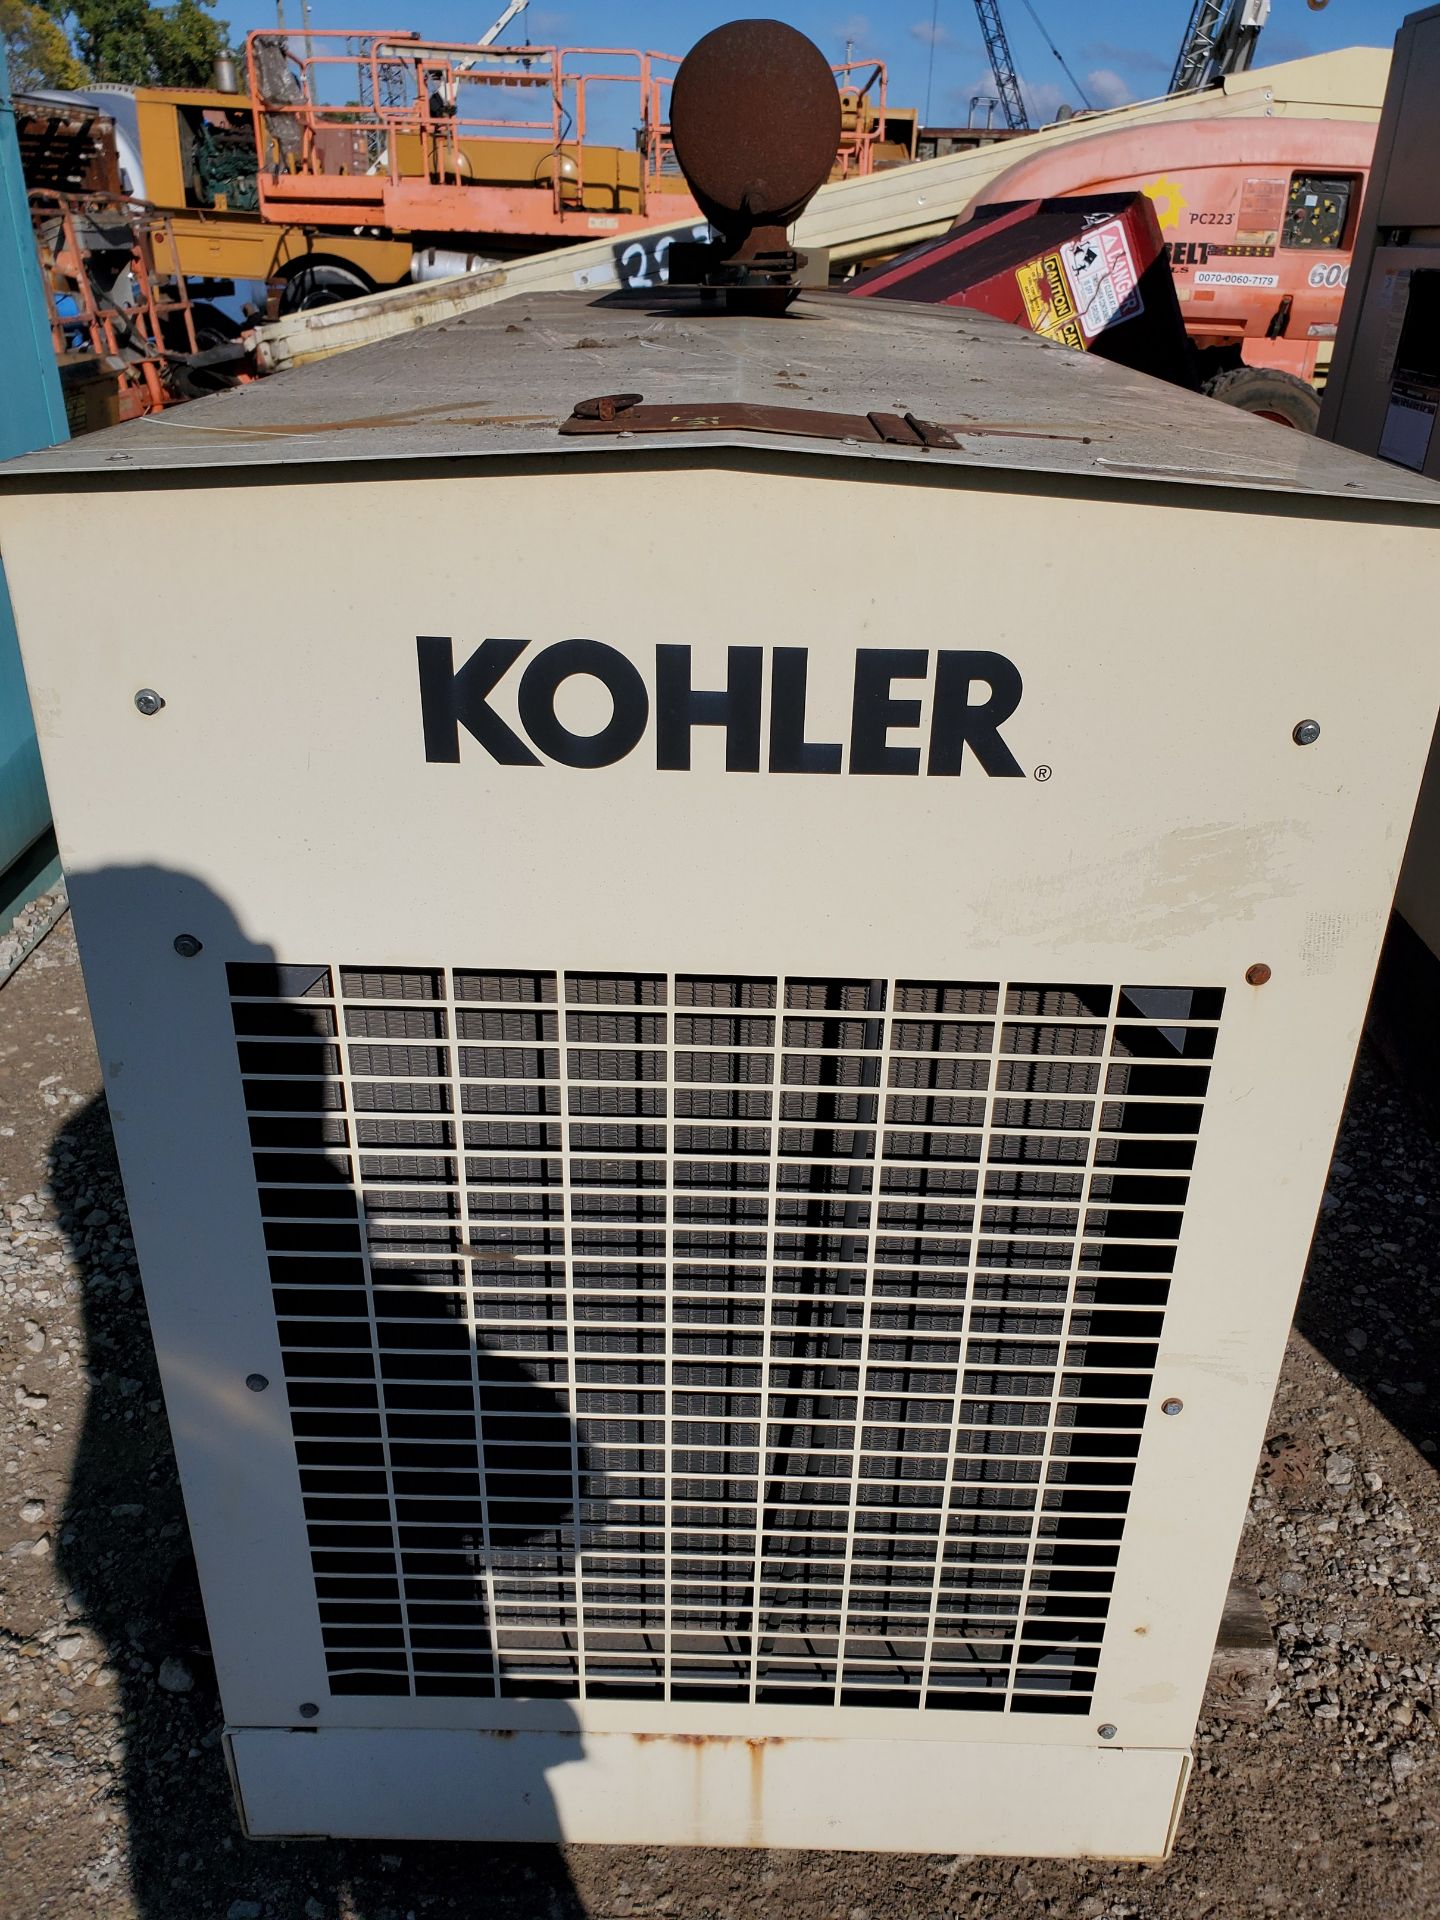 KOHLER NATURAL GAS POWER GENERATOR, MODEL 60RZ, AUTOMATIC 13V OUTPUT BATTERY CHARGER, 2000 YEAR FORD - Image 2 of 14